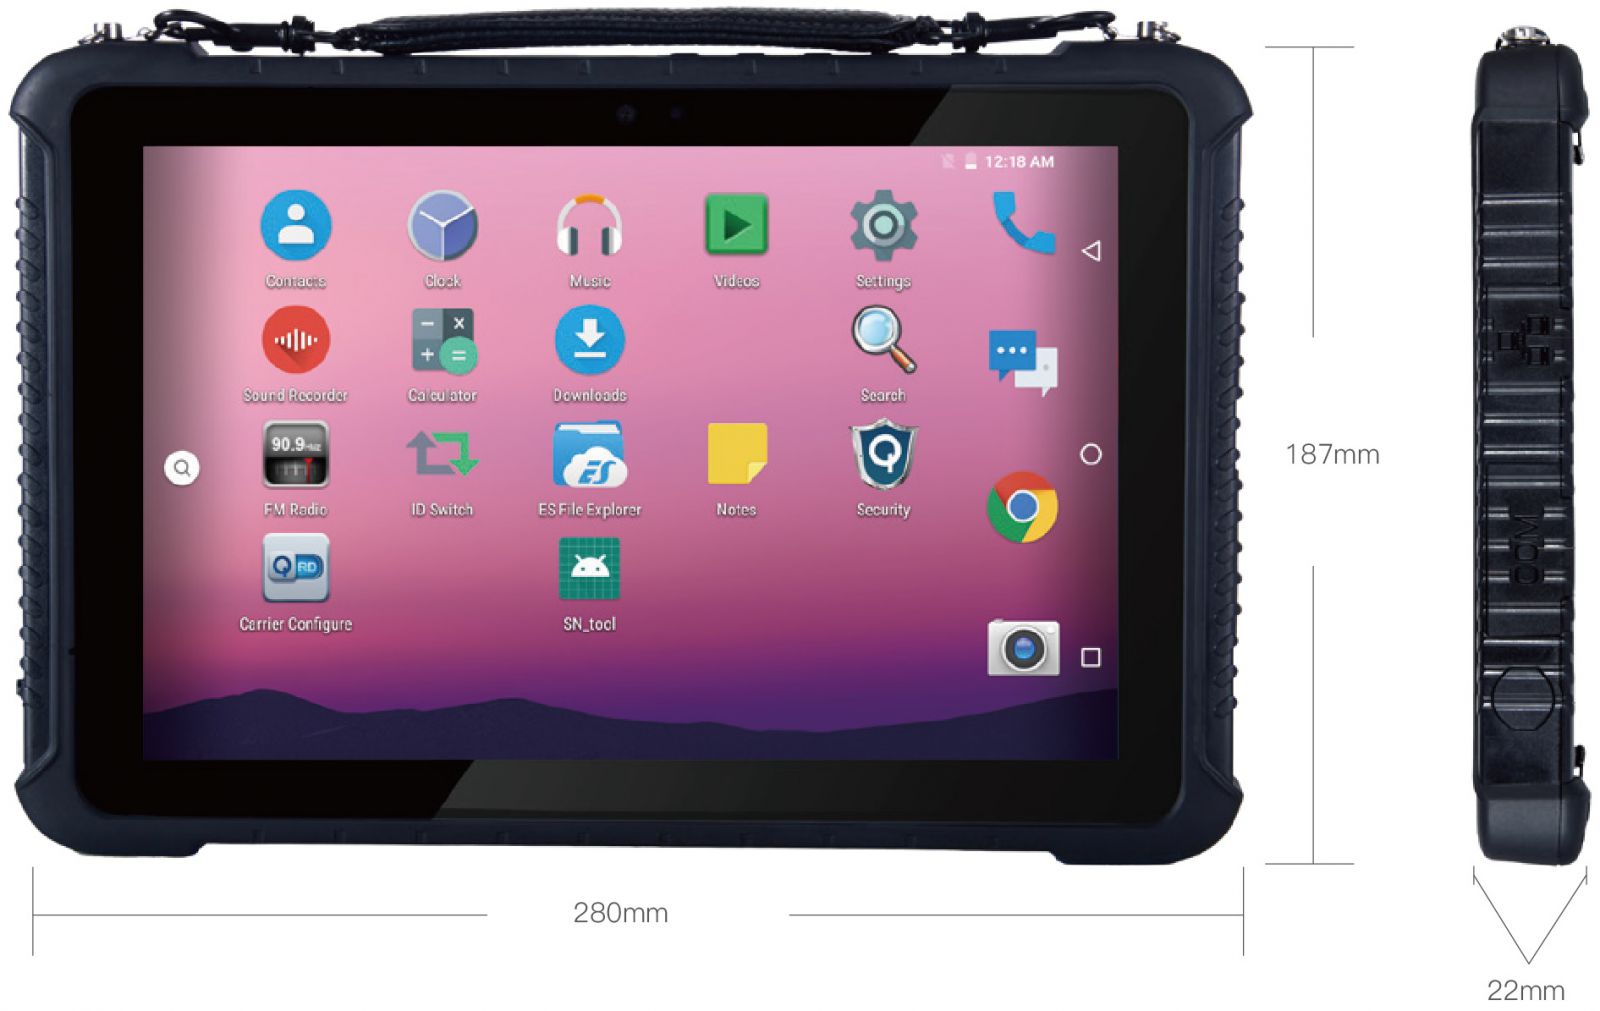 Emdoor Q16 v.5 - waterproof industrial tablet with 4GB RAM, 64GB disk, NFC, AR Film and a 1D Honeywell code scanner 